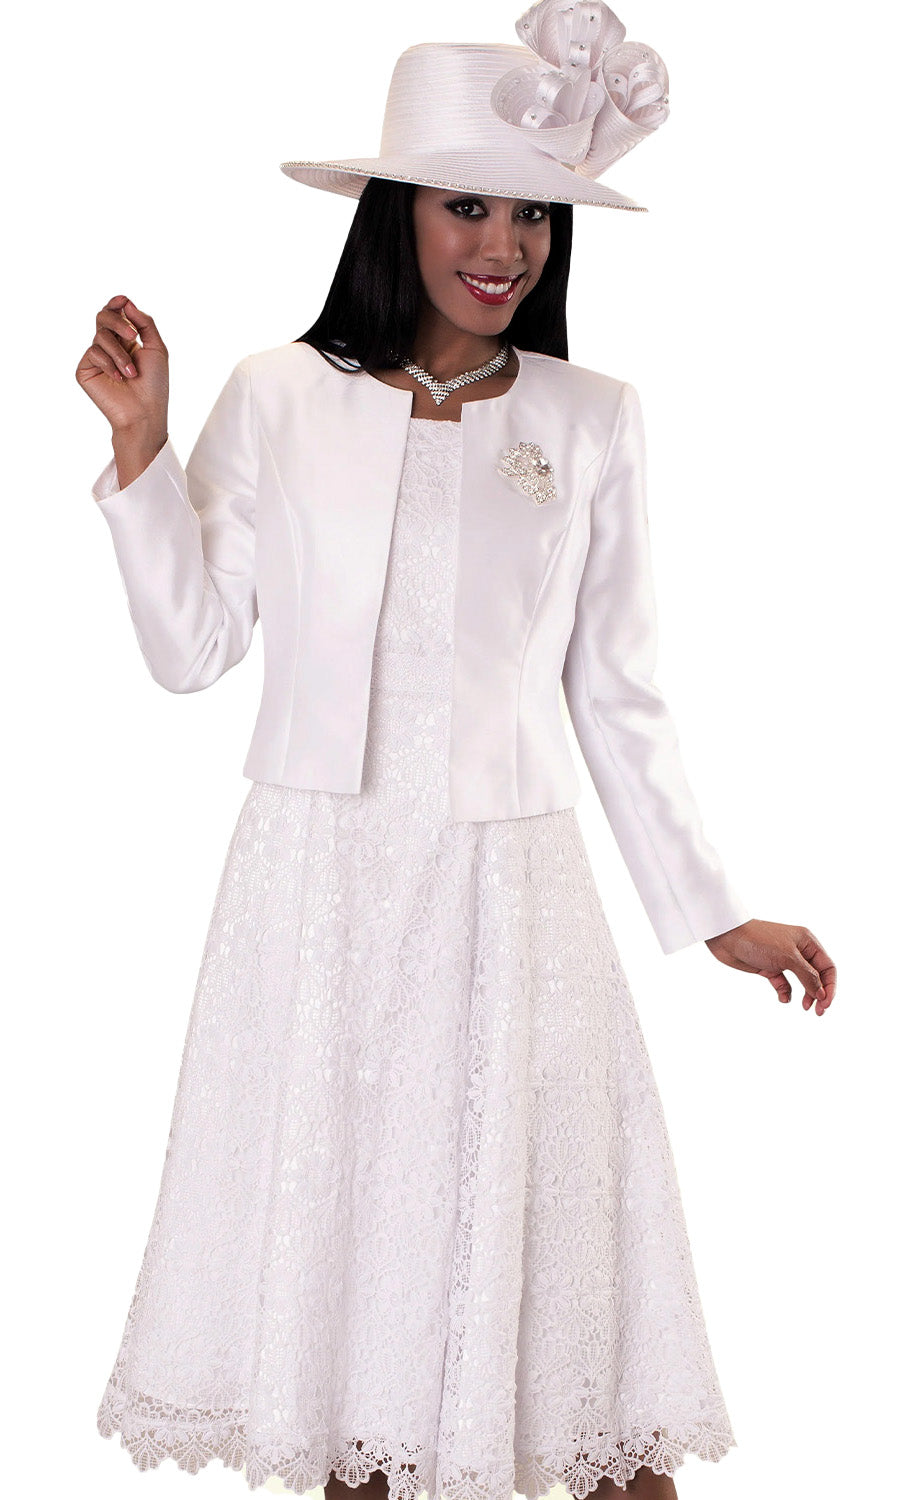 Tally Taylor Dress 4529-White - Church Suits For Less